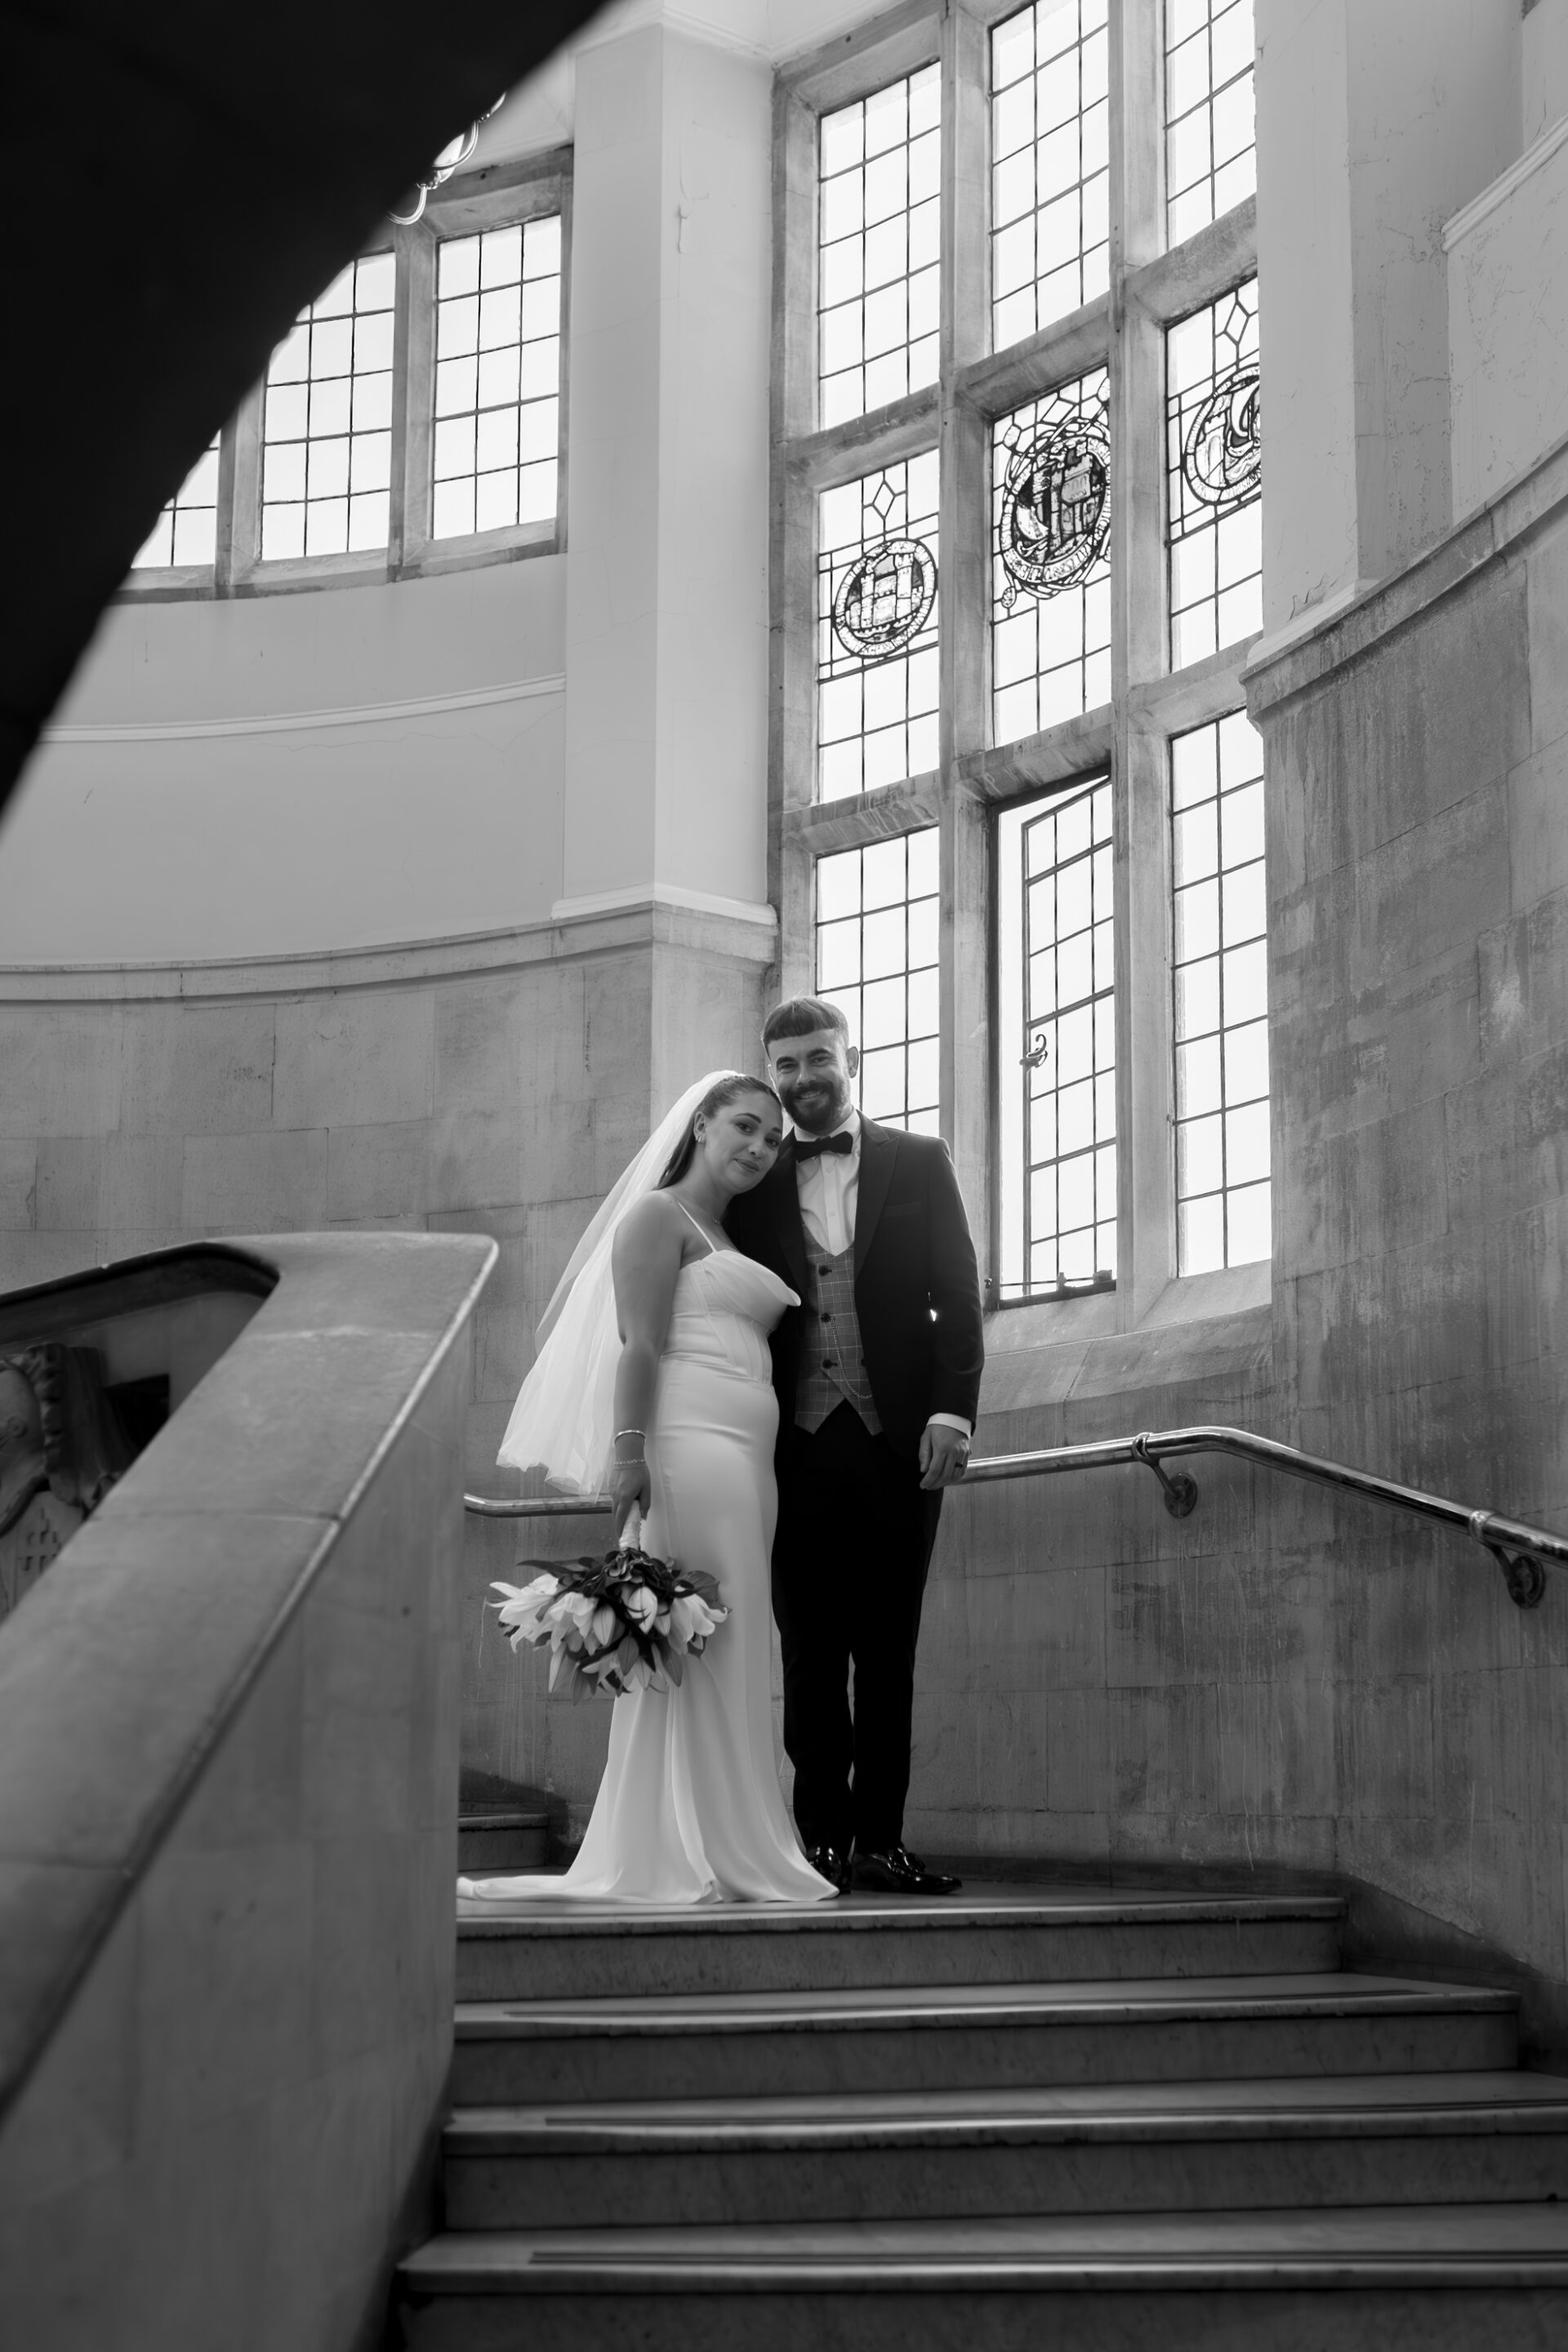 A classic black and white couple portrait of our bride and groom at Bristol Library